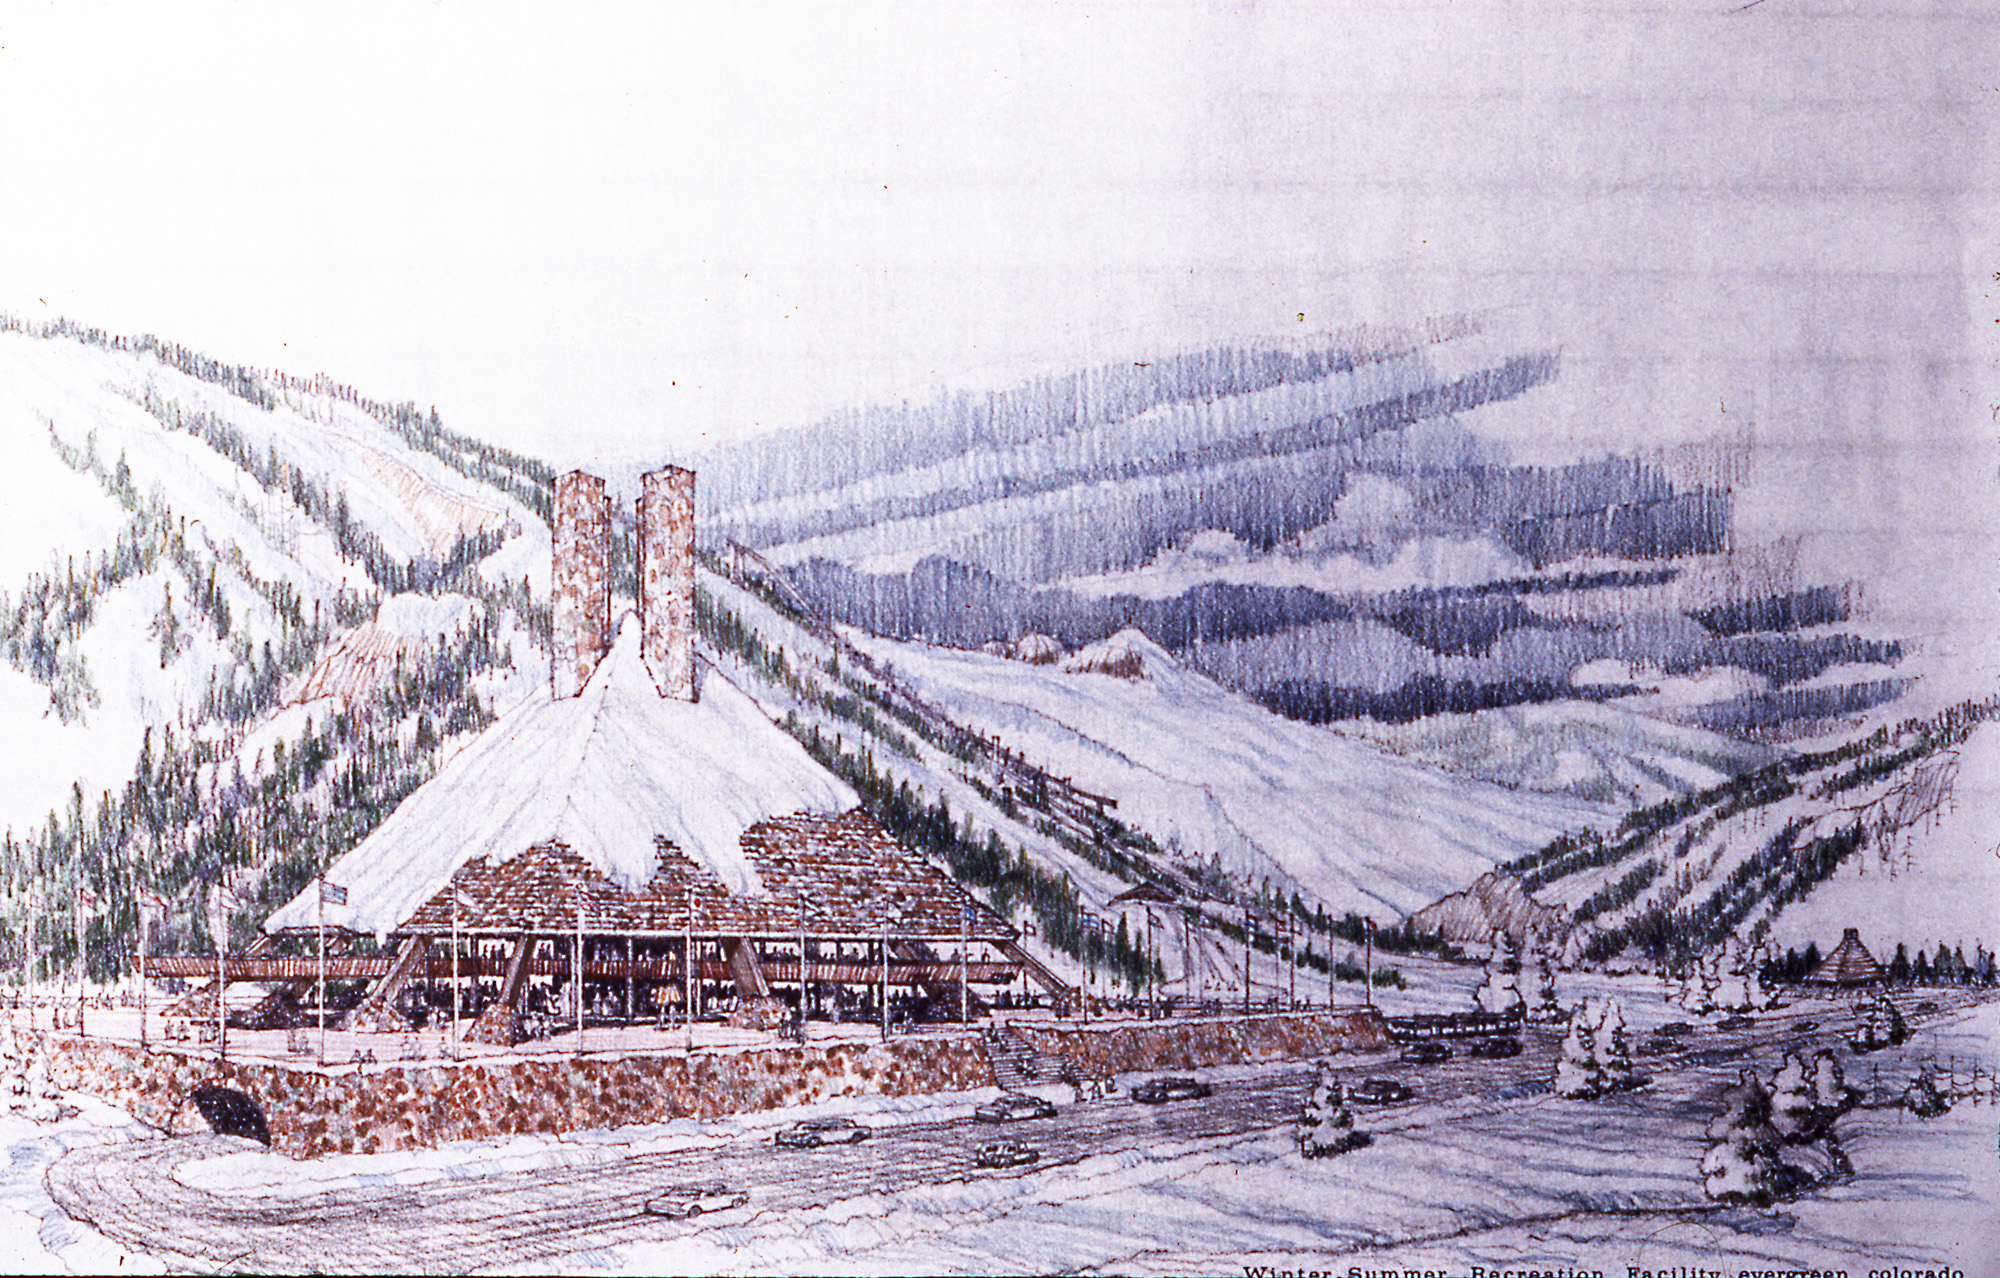 Architectural drawing of the proposed Winter/Summer Recreation Facility in Evergreen